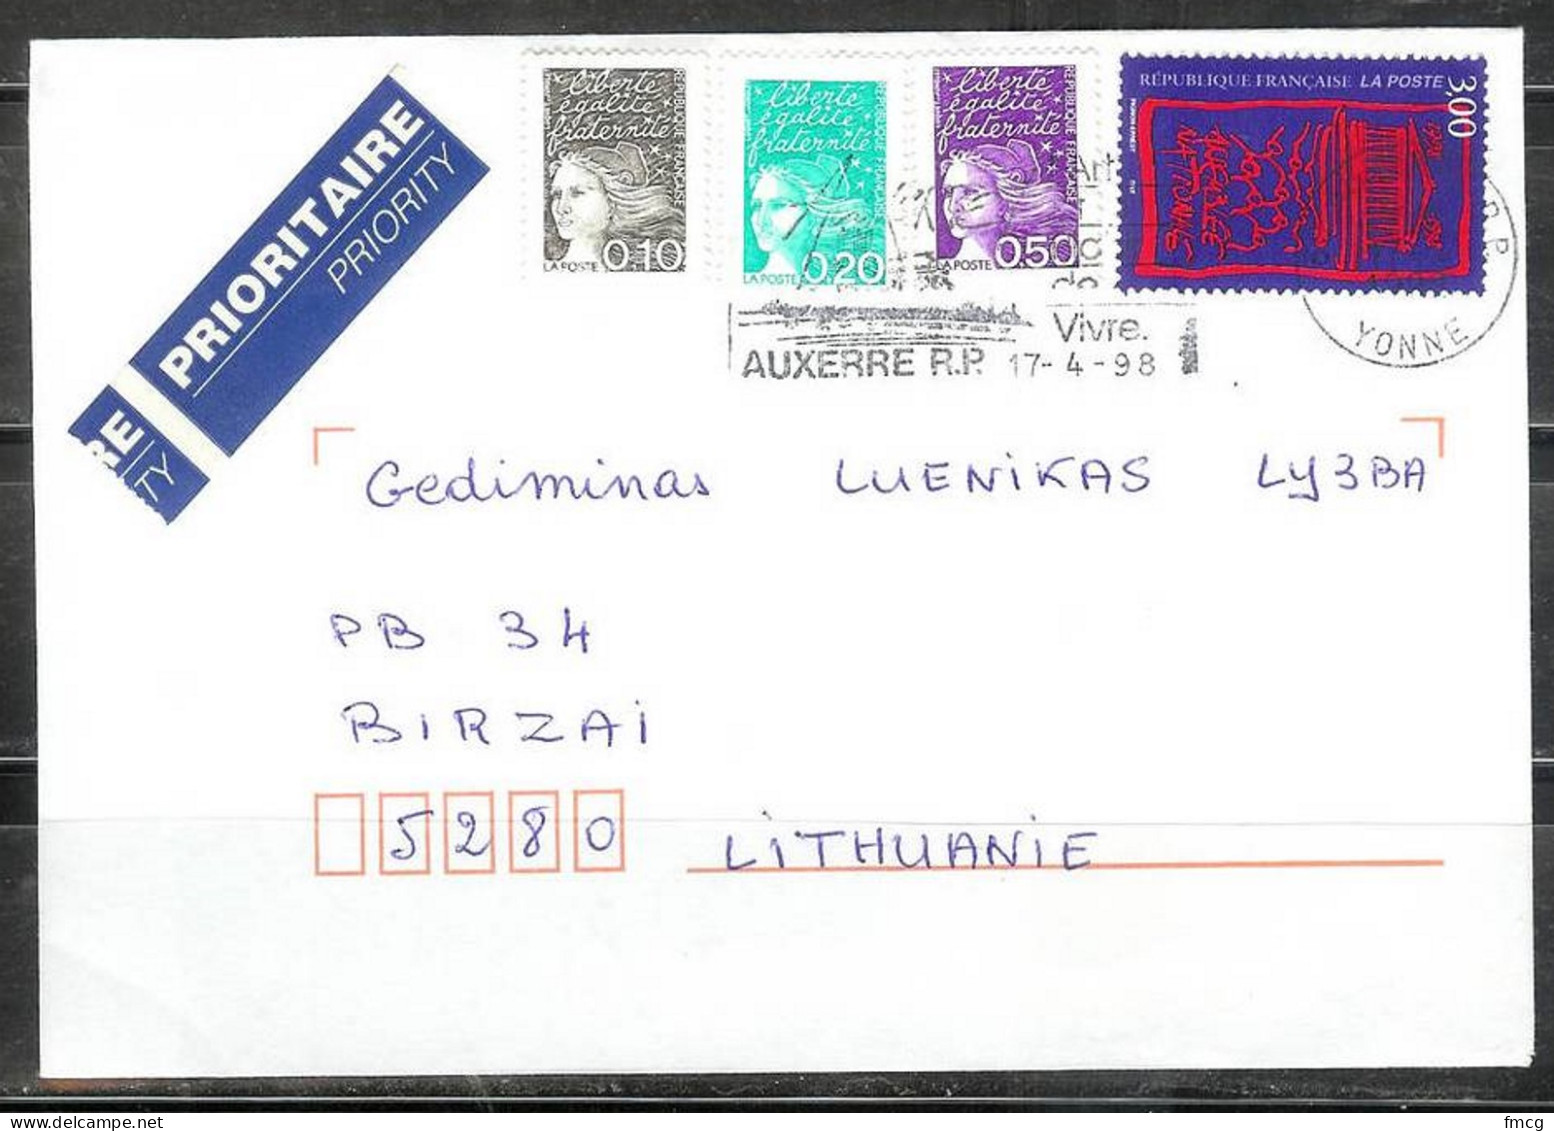  1998 National Assembly, Auxerre (17-4-98) To Lithuania - Covers & Documents